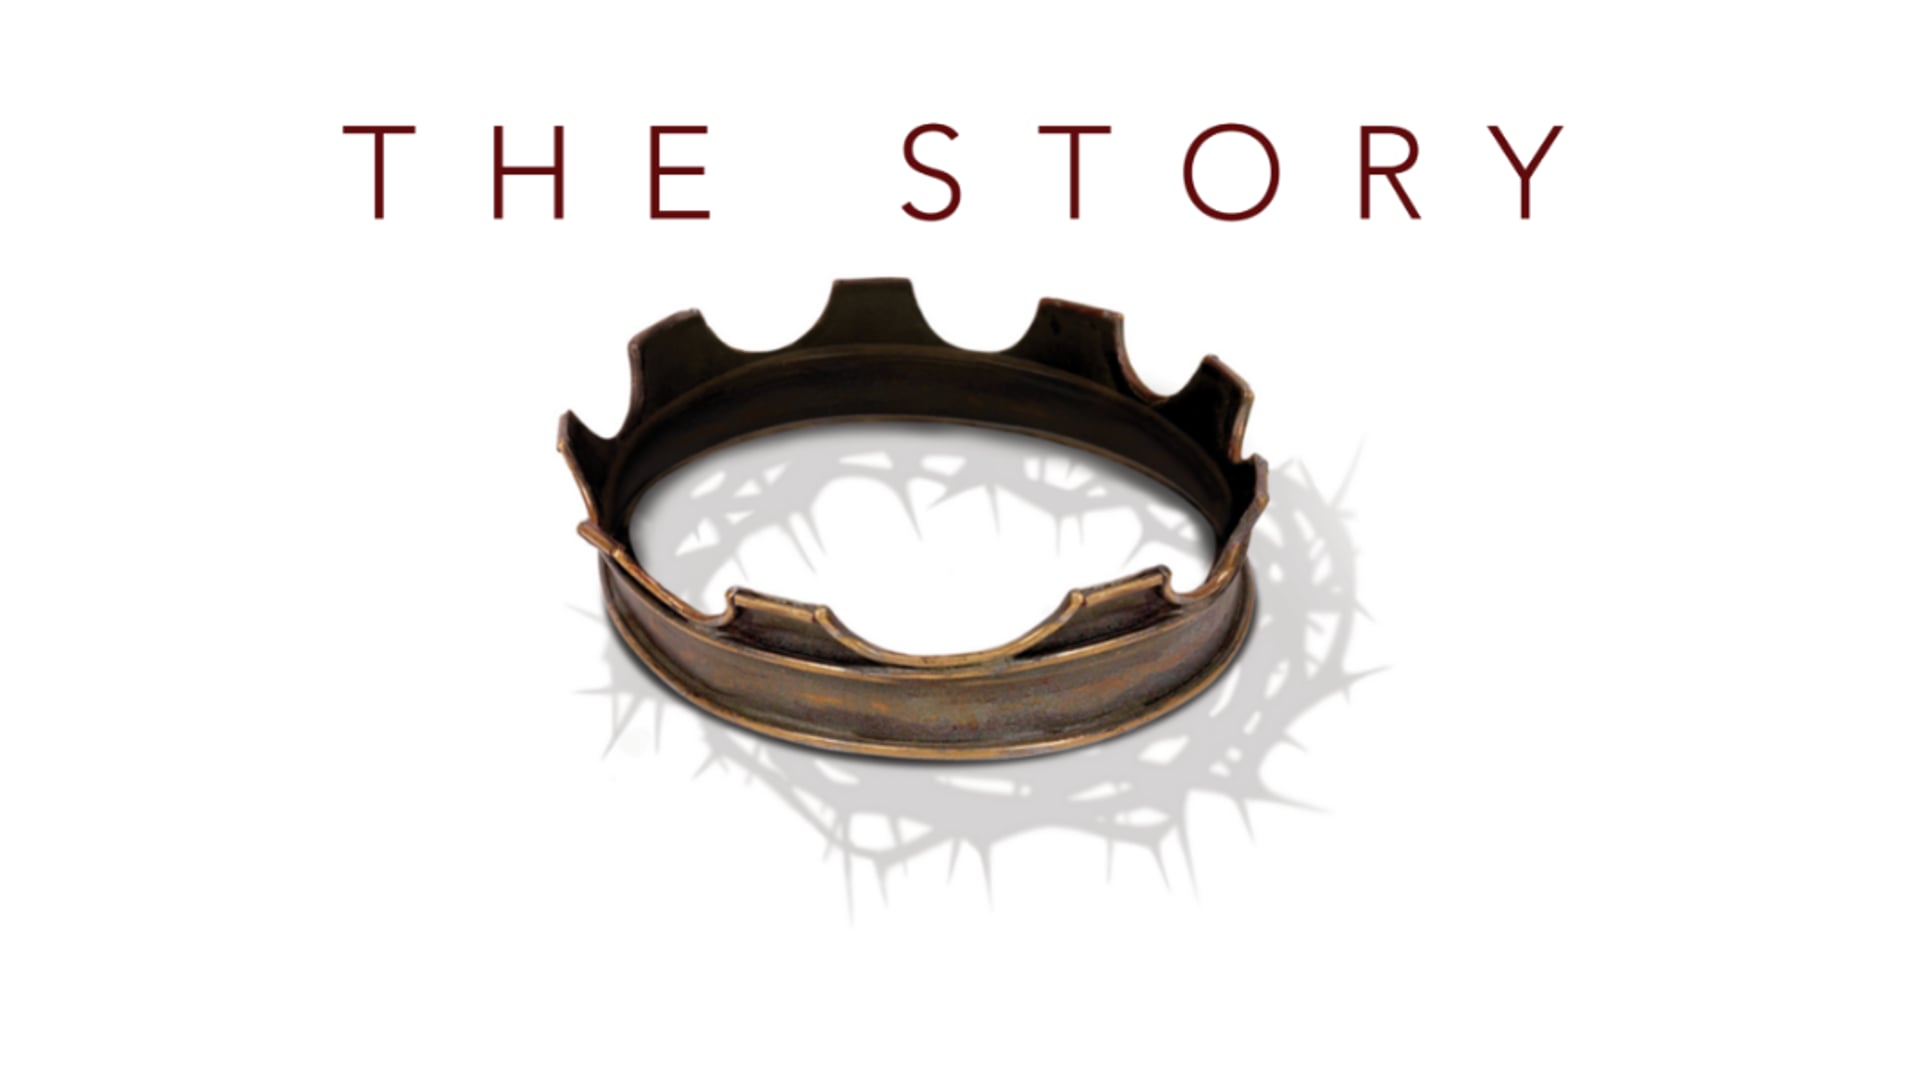 The Story, Oct. 30, 2022